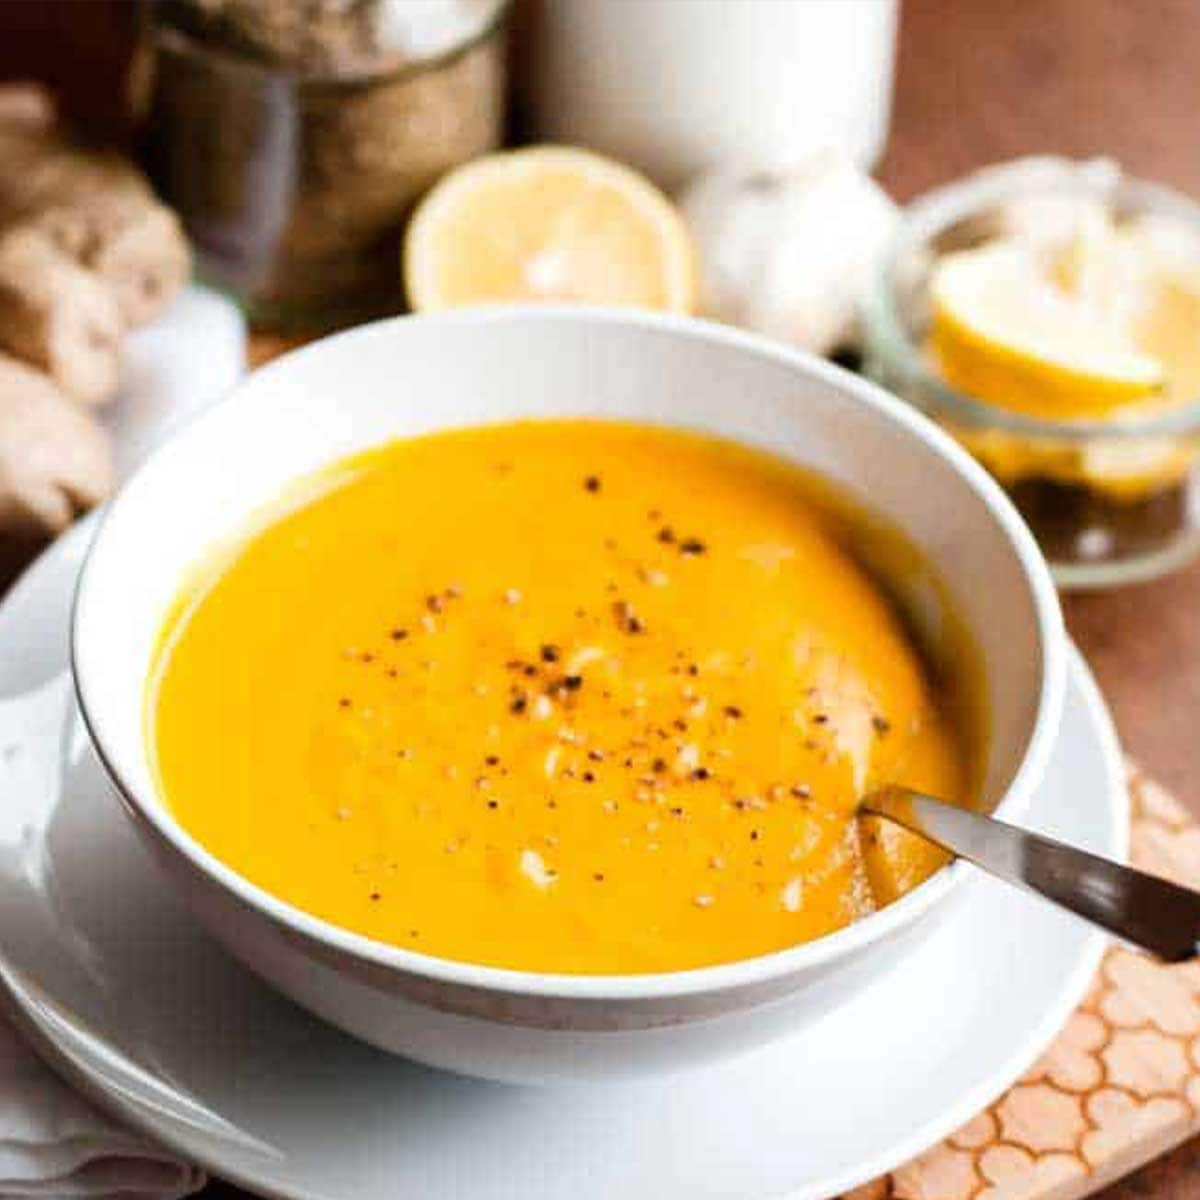 carrot ginger soup recipe in a white bowl with a stainless steel spoon and cracked black pepper on top.